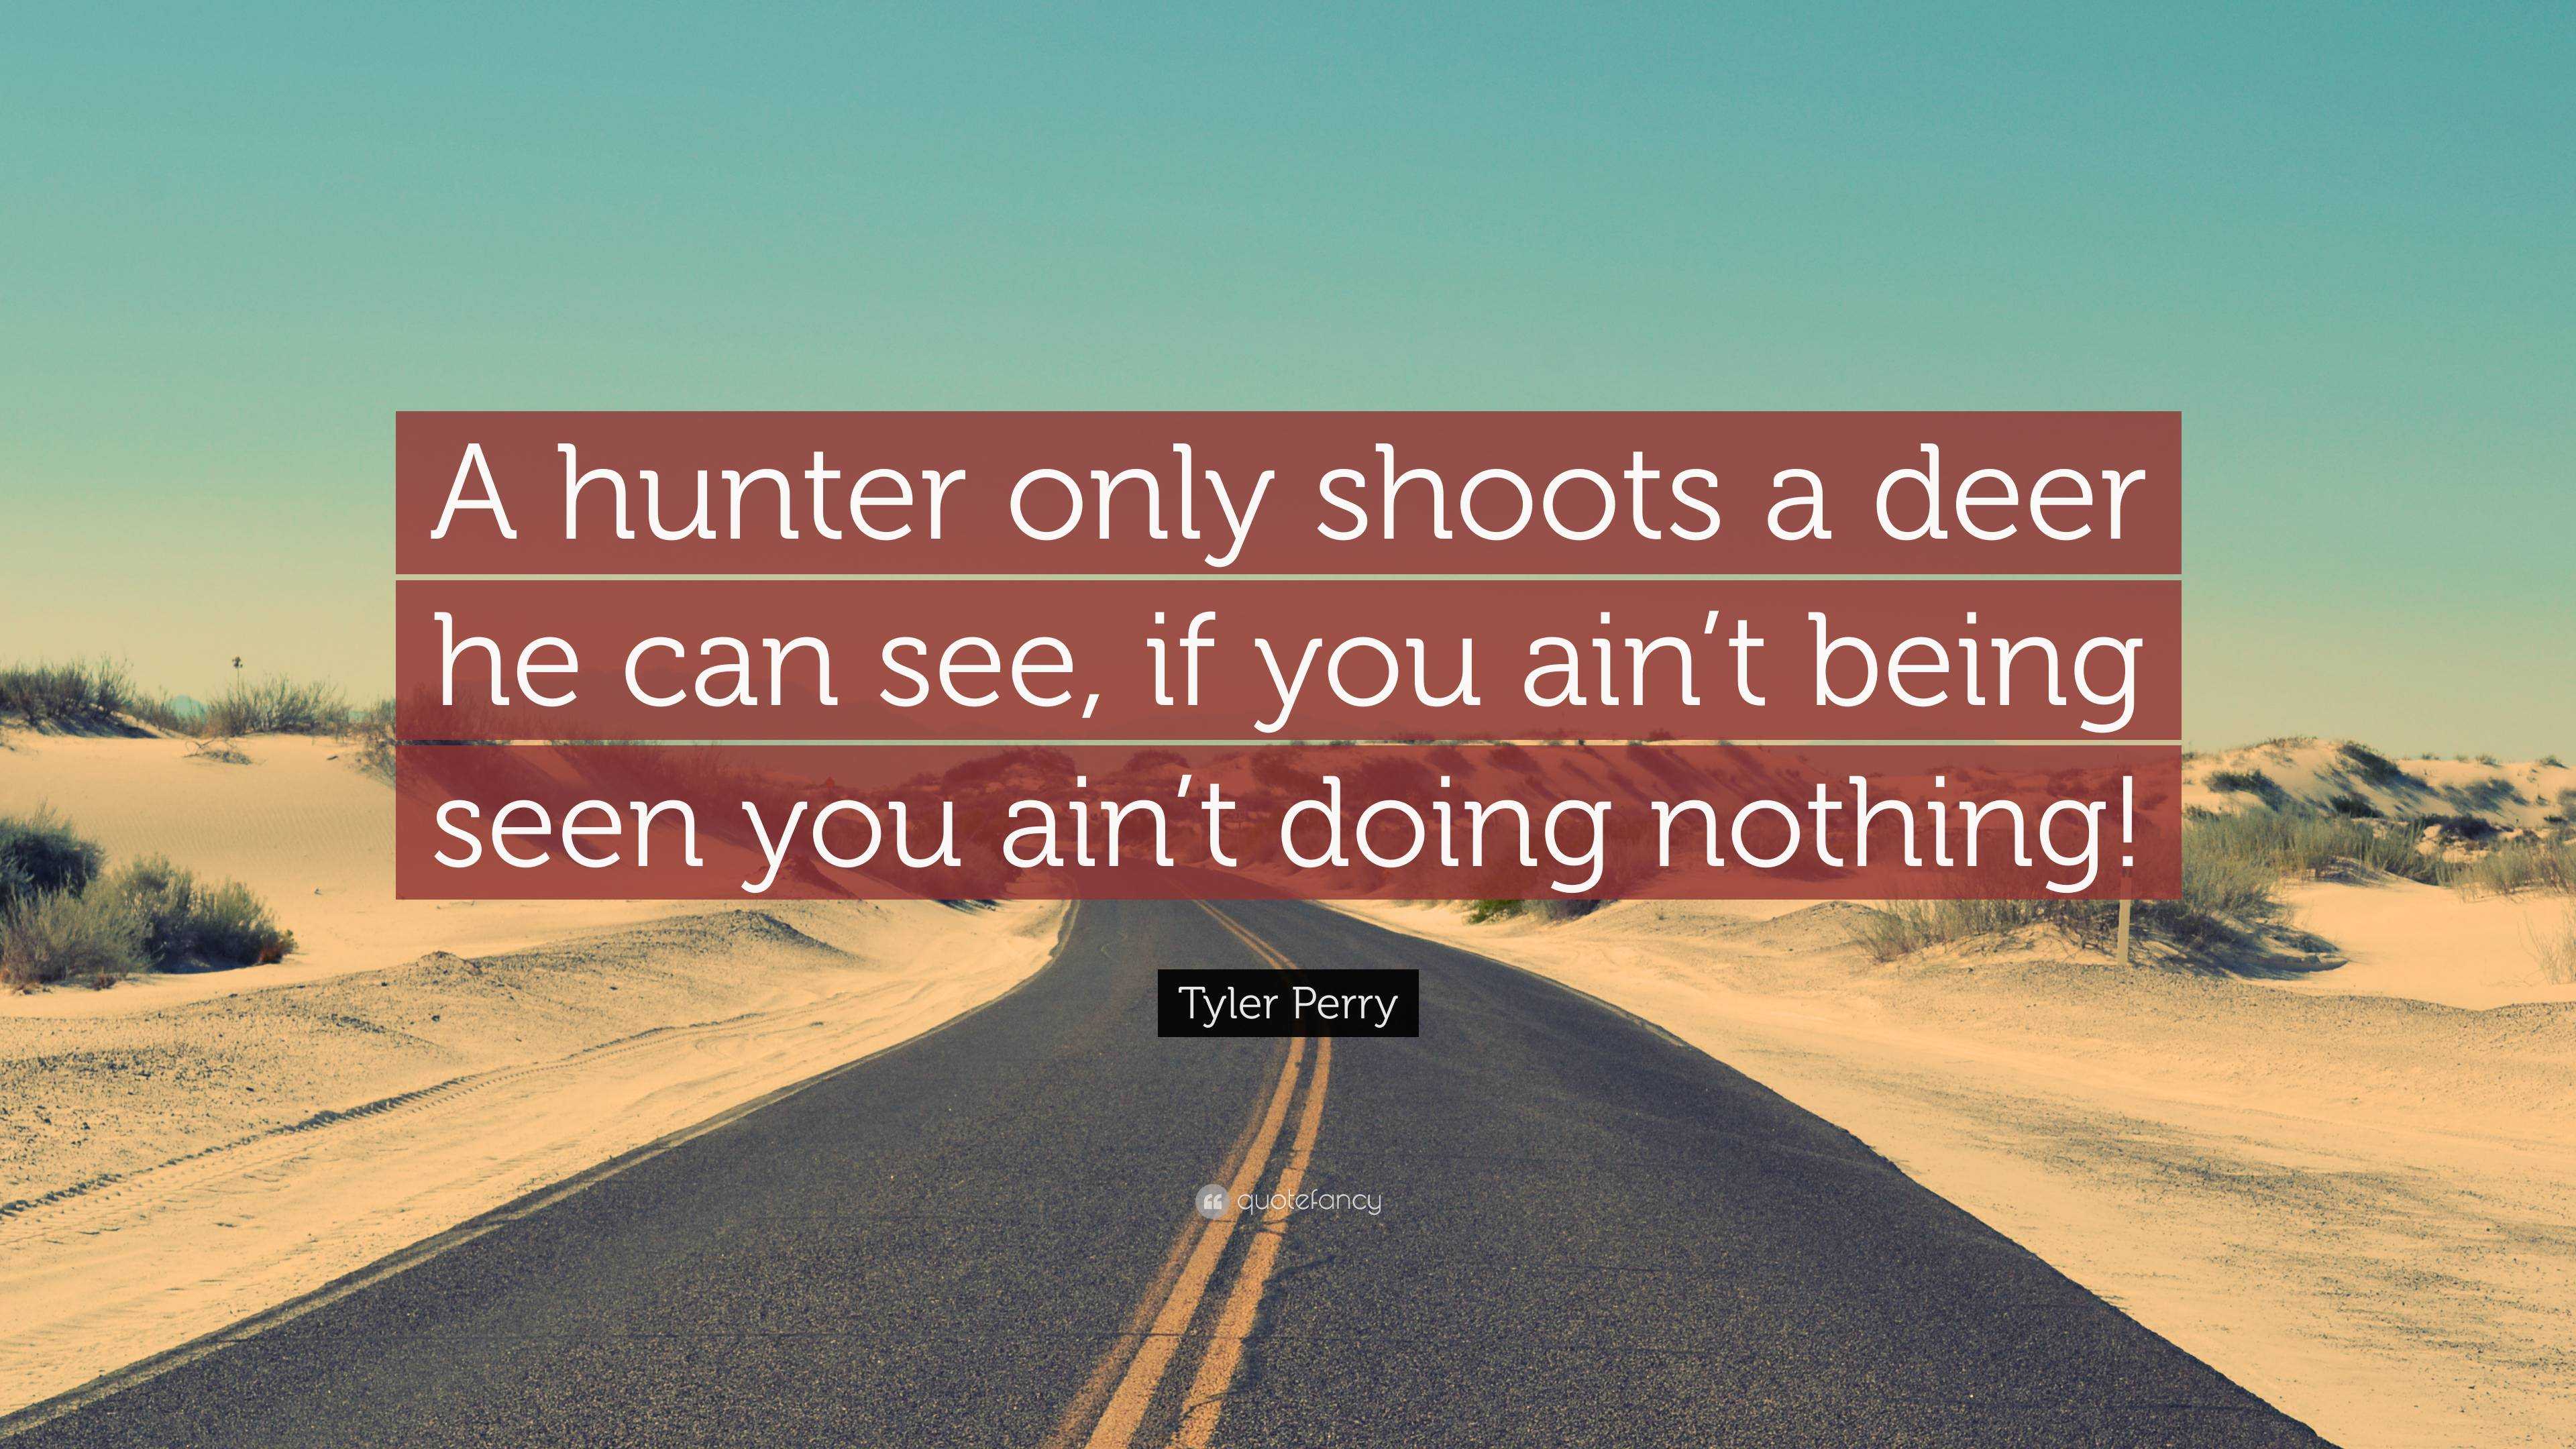 Tyler Perry Quote: “A hunter only shoots a deer he can see, if you ain ...